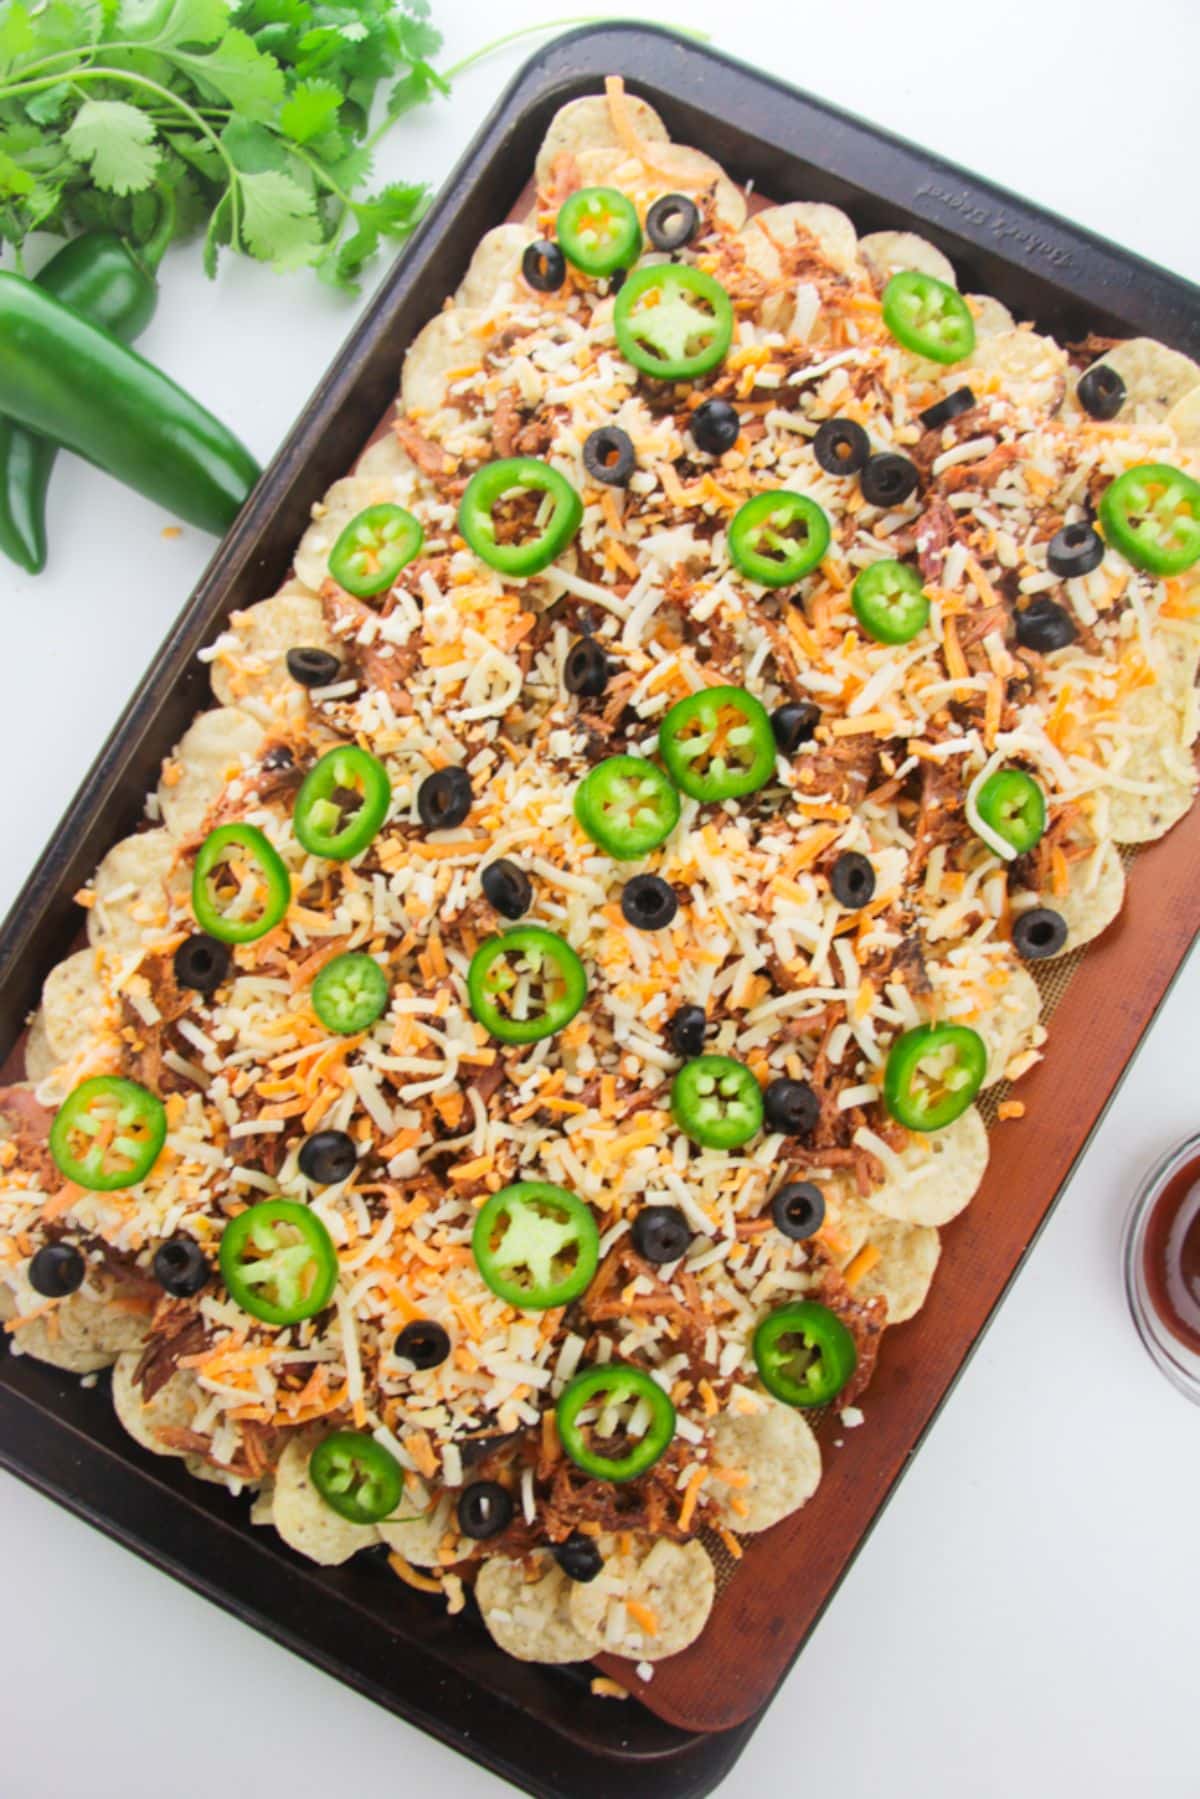 Black olives and jalapeno peppers are added to the tortilla chips with shredded cheese.